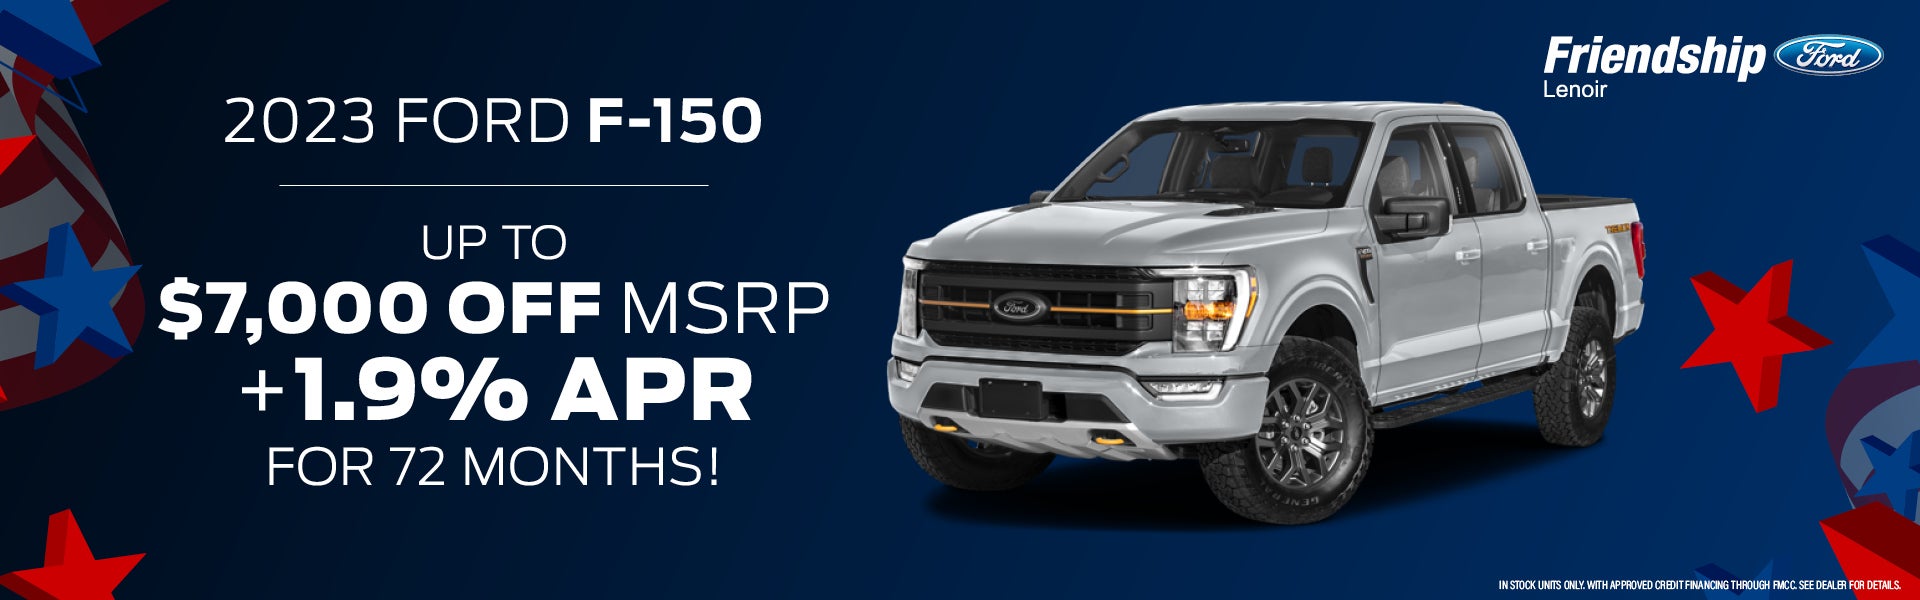 Shop 2023 Ford F-150s!